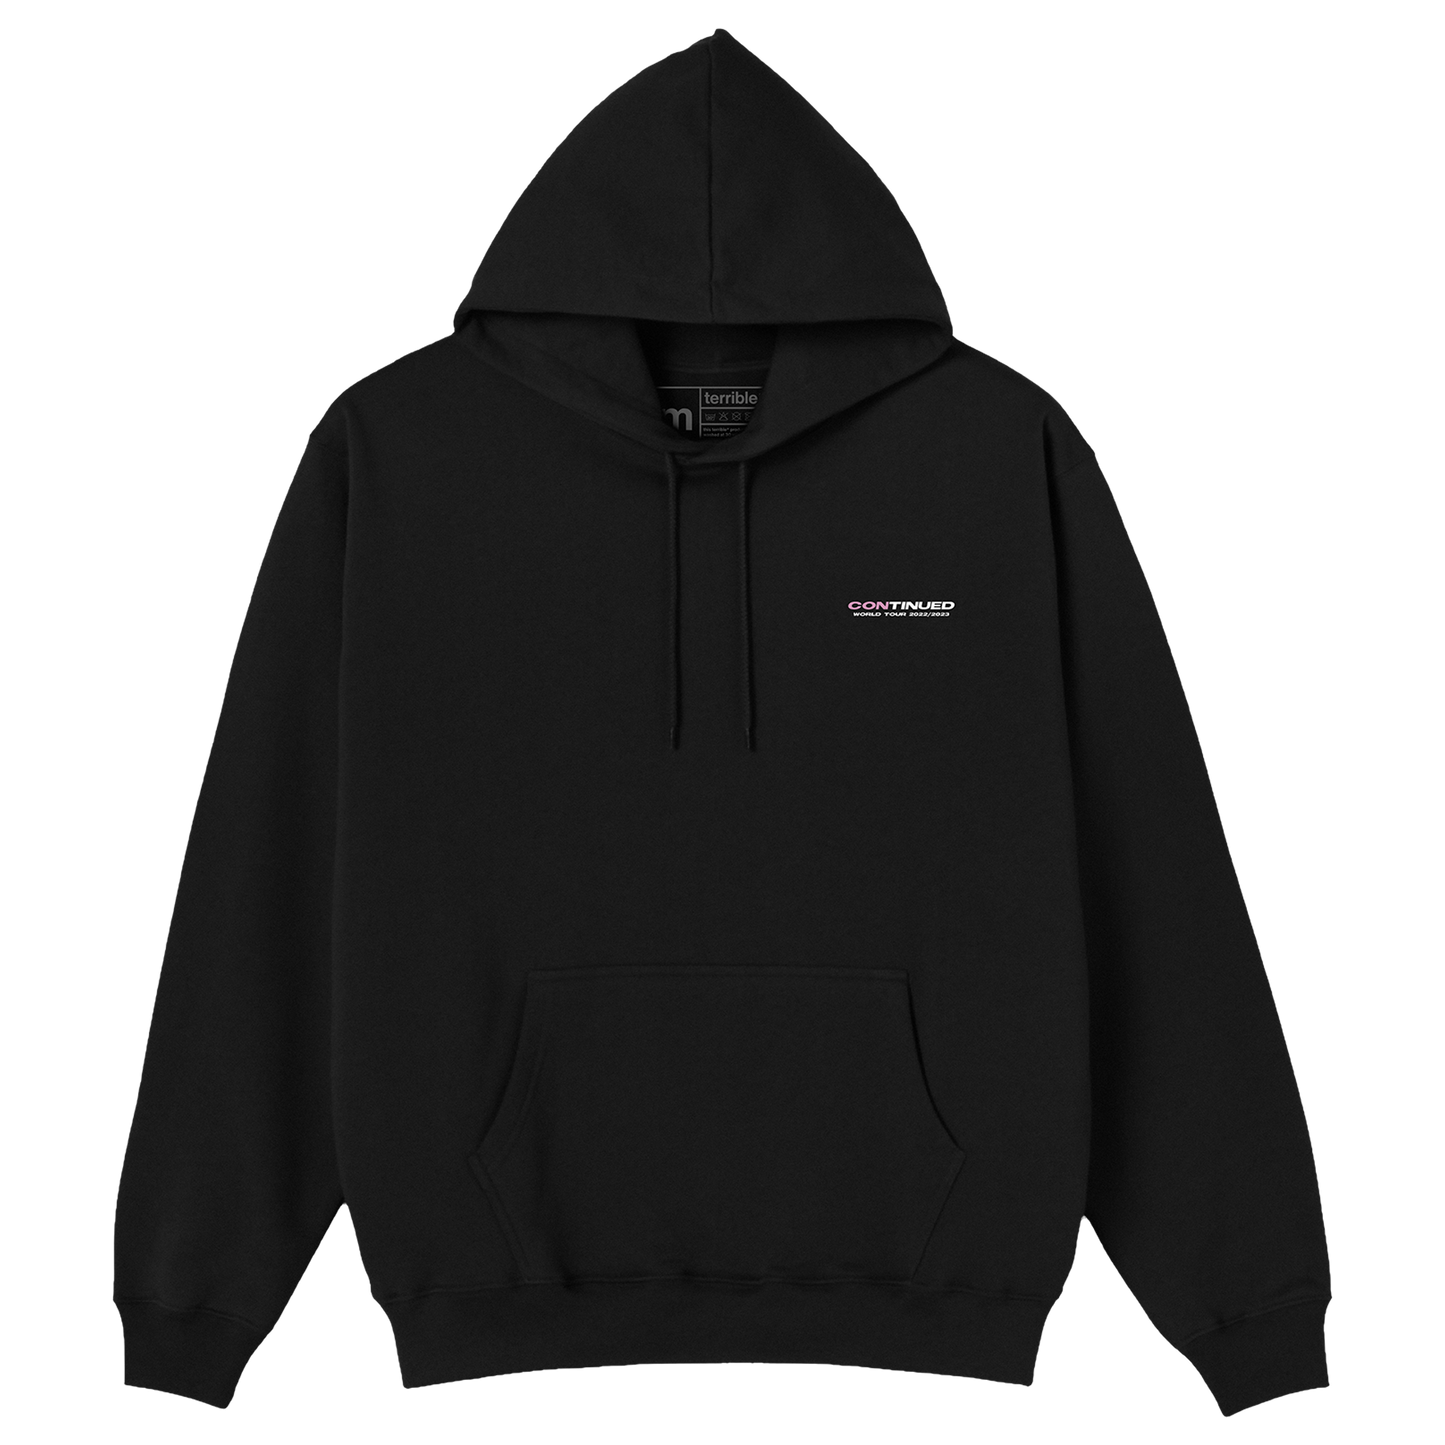 Continued World Tour 2022 Hoodie